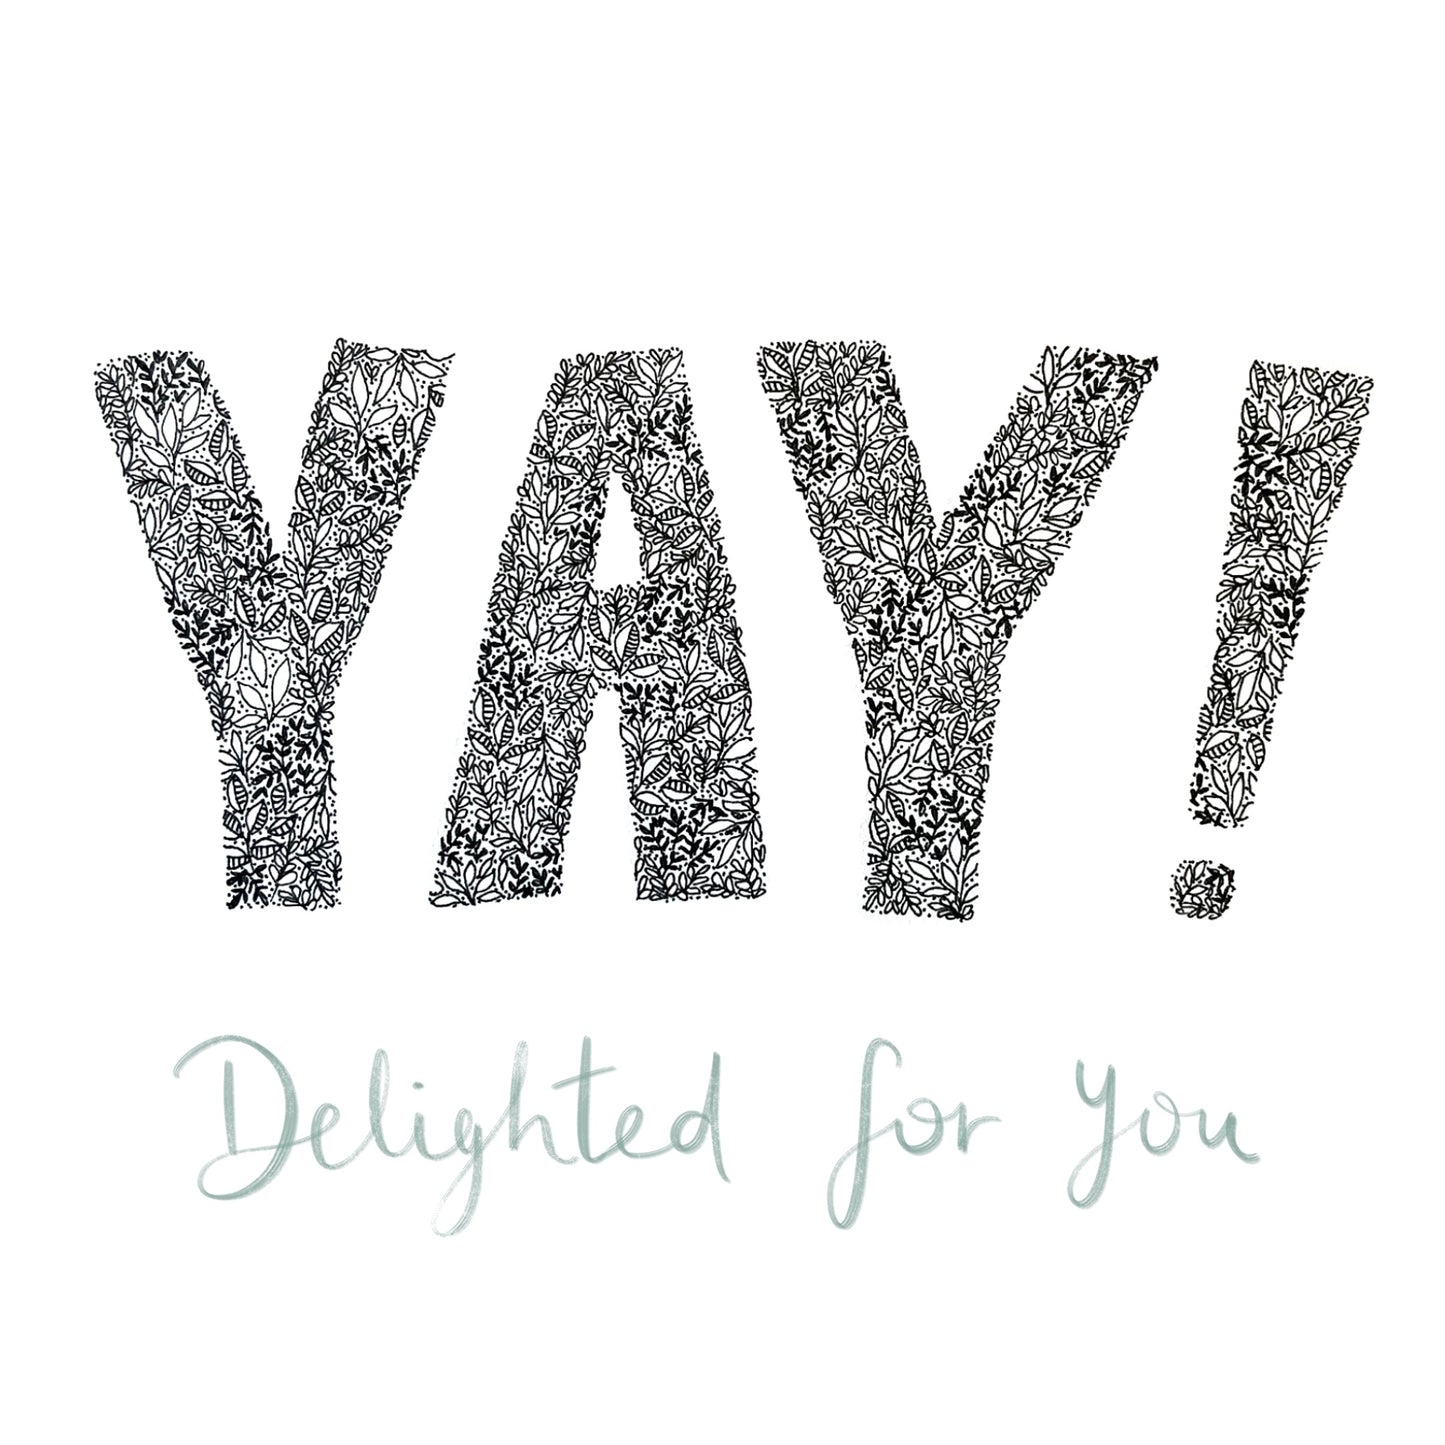 image shows YAY DELIGHTED FOR YOU illustration card. YAY is written in cap block writing drawn from flowers and leaves. and DELIGHTED FOR YOU is written in gold pen. Image is shown on a plain white background. 